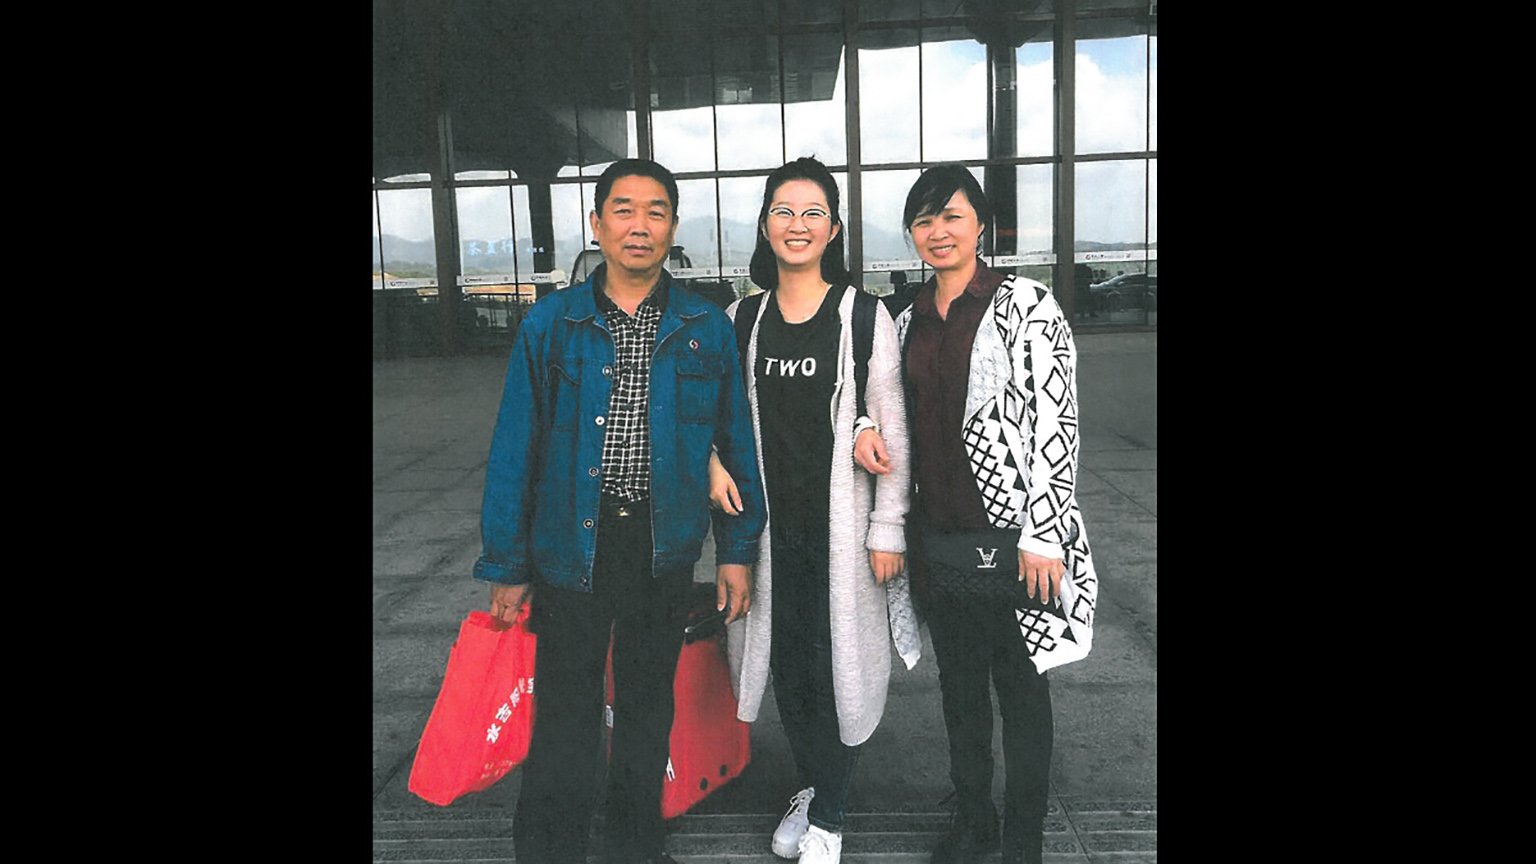 Yingying Zhang, center, stands with her parents at a train station in China in 2017. This marked the last time they saw their daughter alive. (U.S. Attorney's Office)